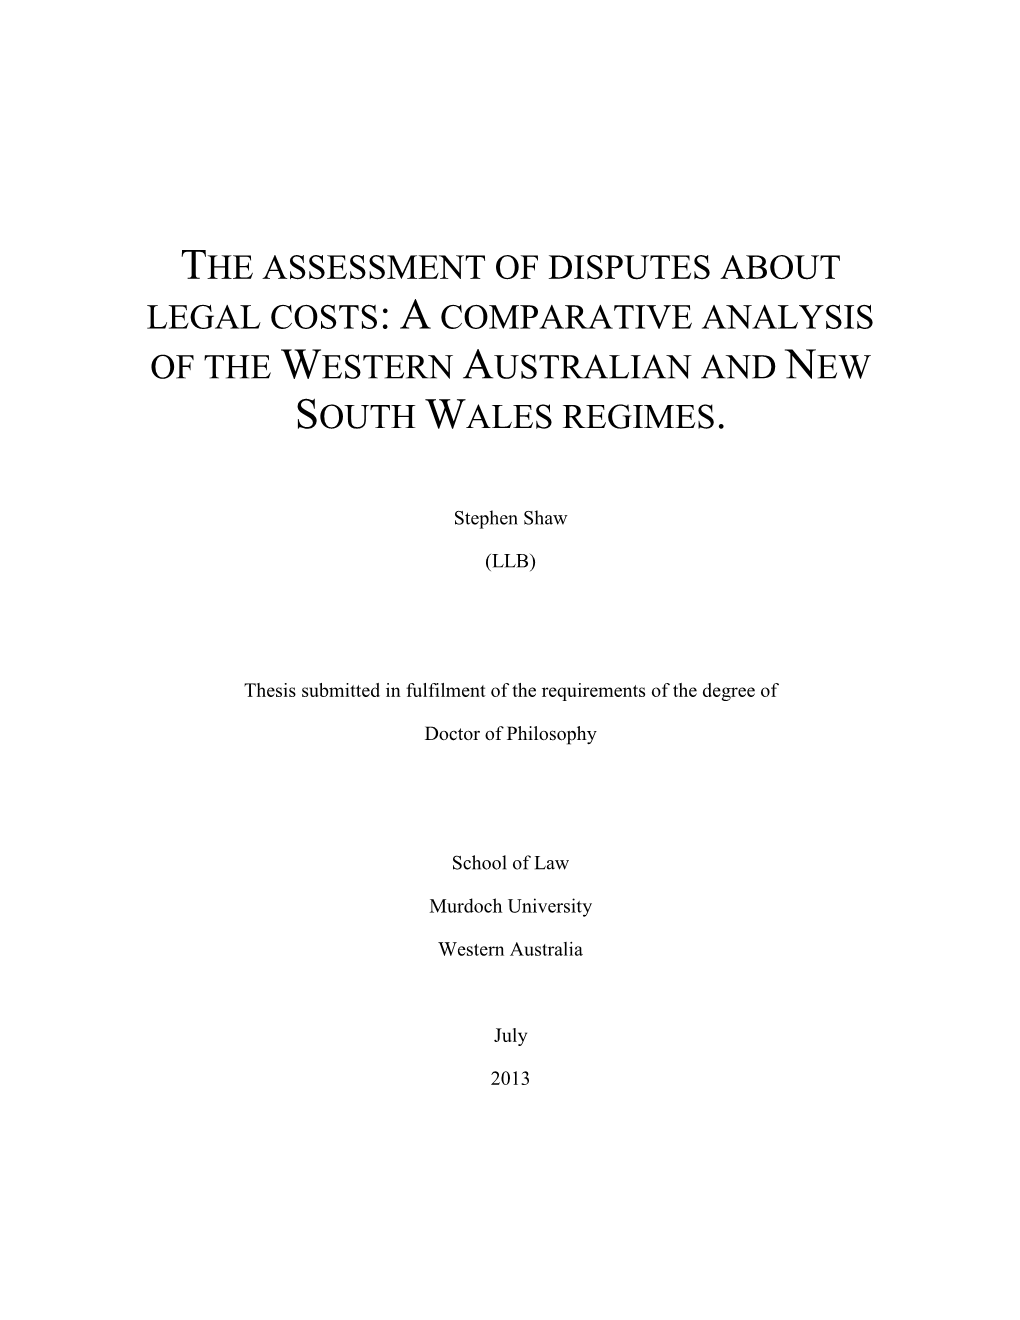 Legal Costs: a Comparative Analysis of the Western Australian and New South Wales Regimes